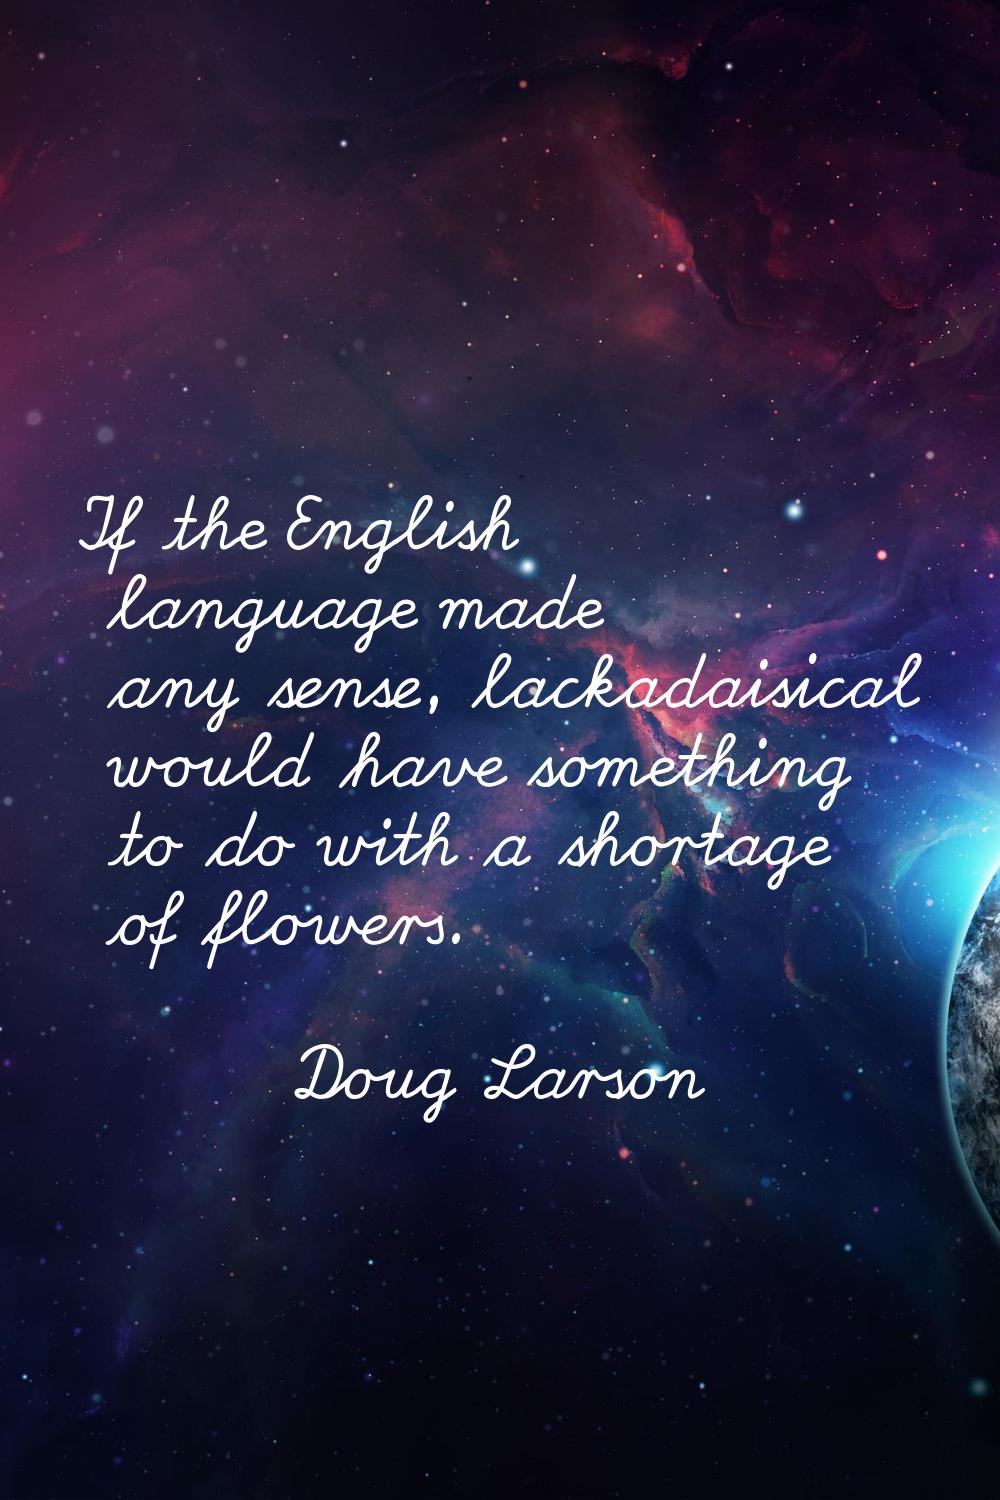 If the English language made any sense, lackadaisical would have something to do with a shortage of